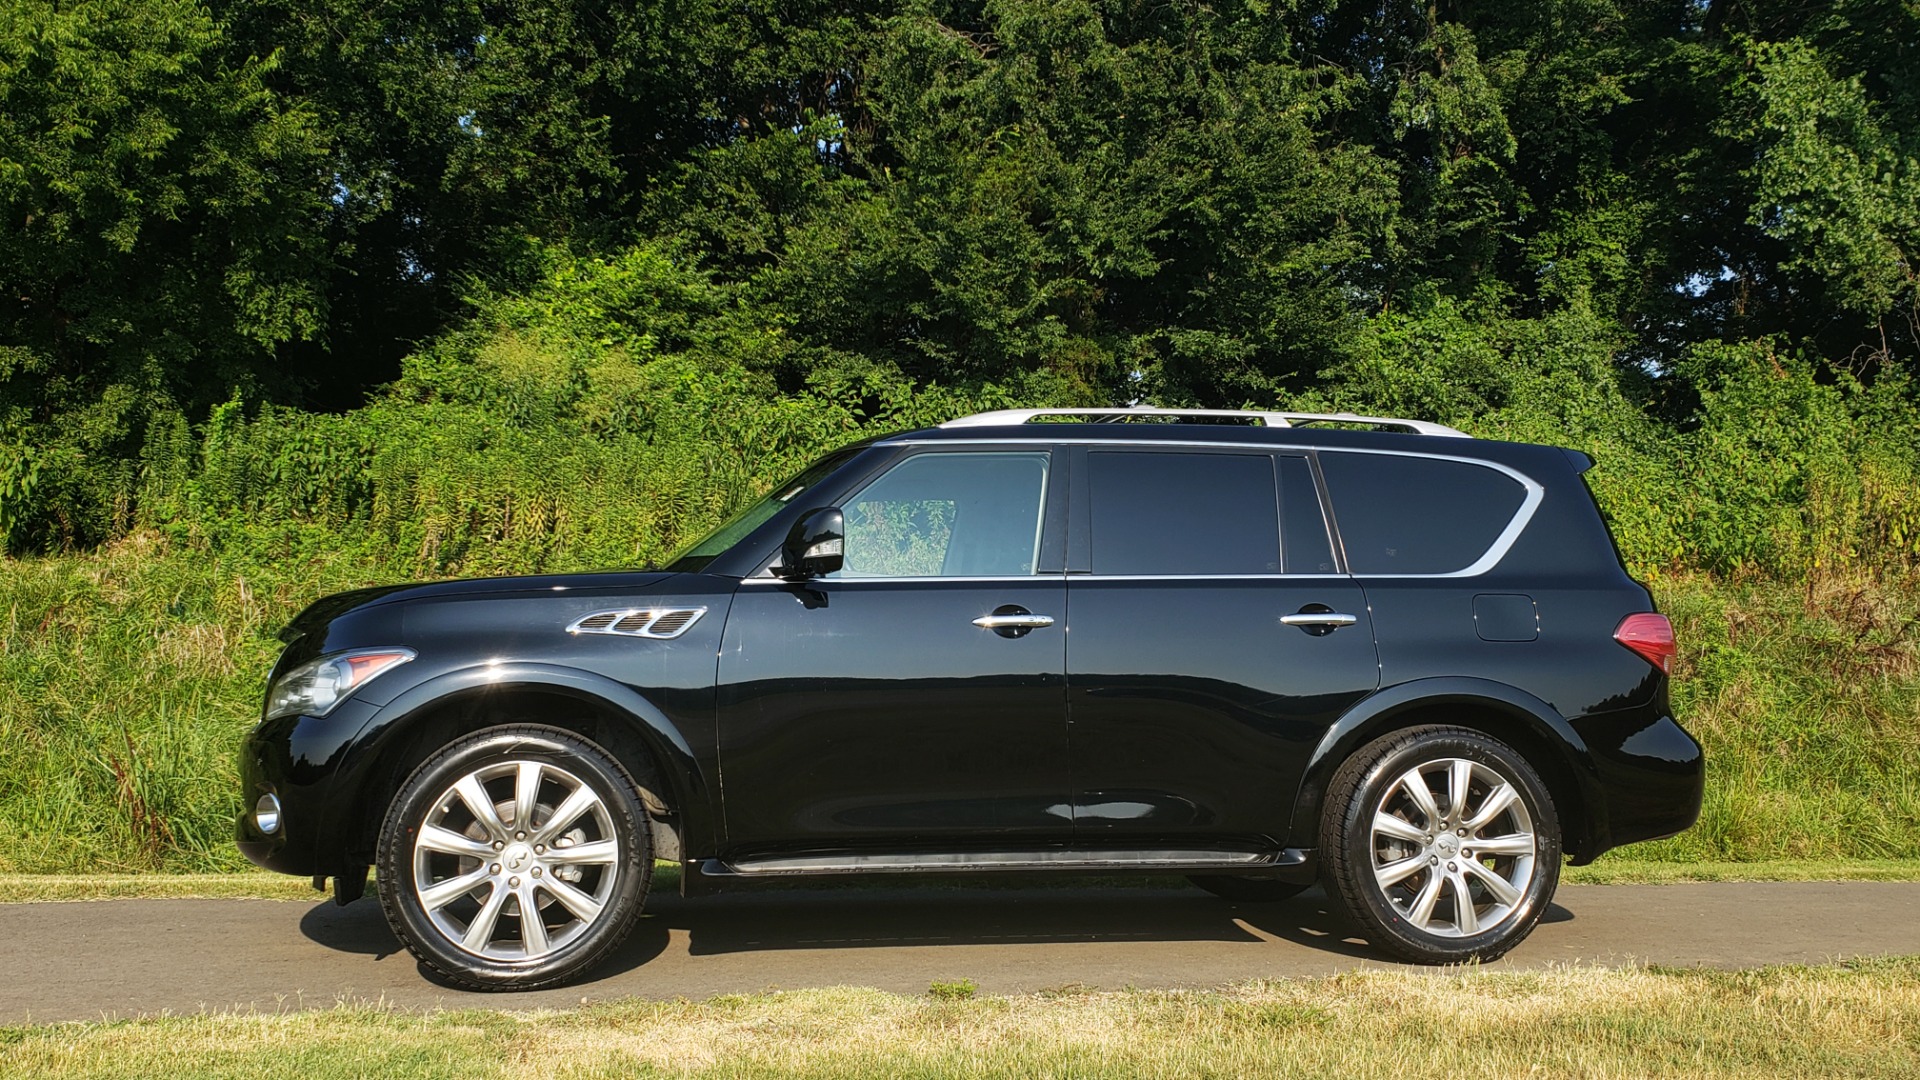 Used 2013 INFINITI QX56 THEATER PKG / NAV / SUNROOF / HEATED SEATS /  REARVIEW For Sale ($20,995) | Formula Imports Stock #FC10622